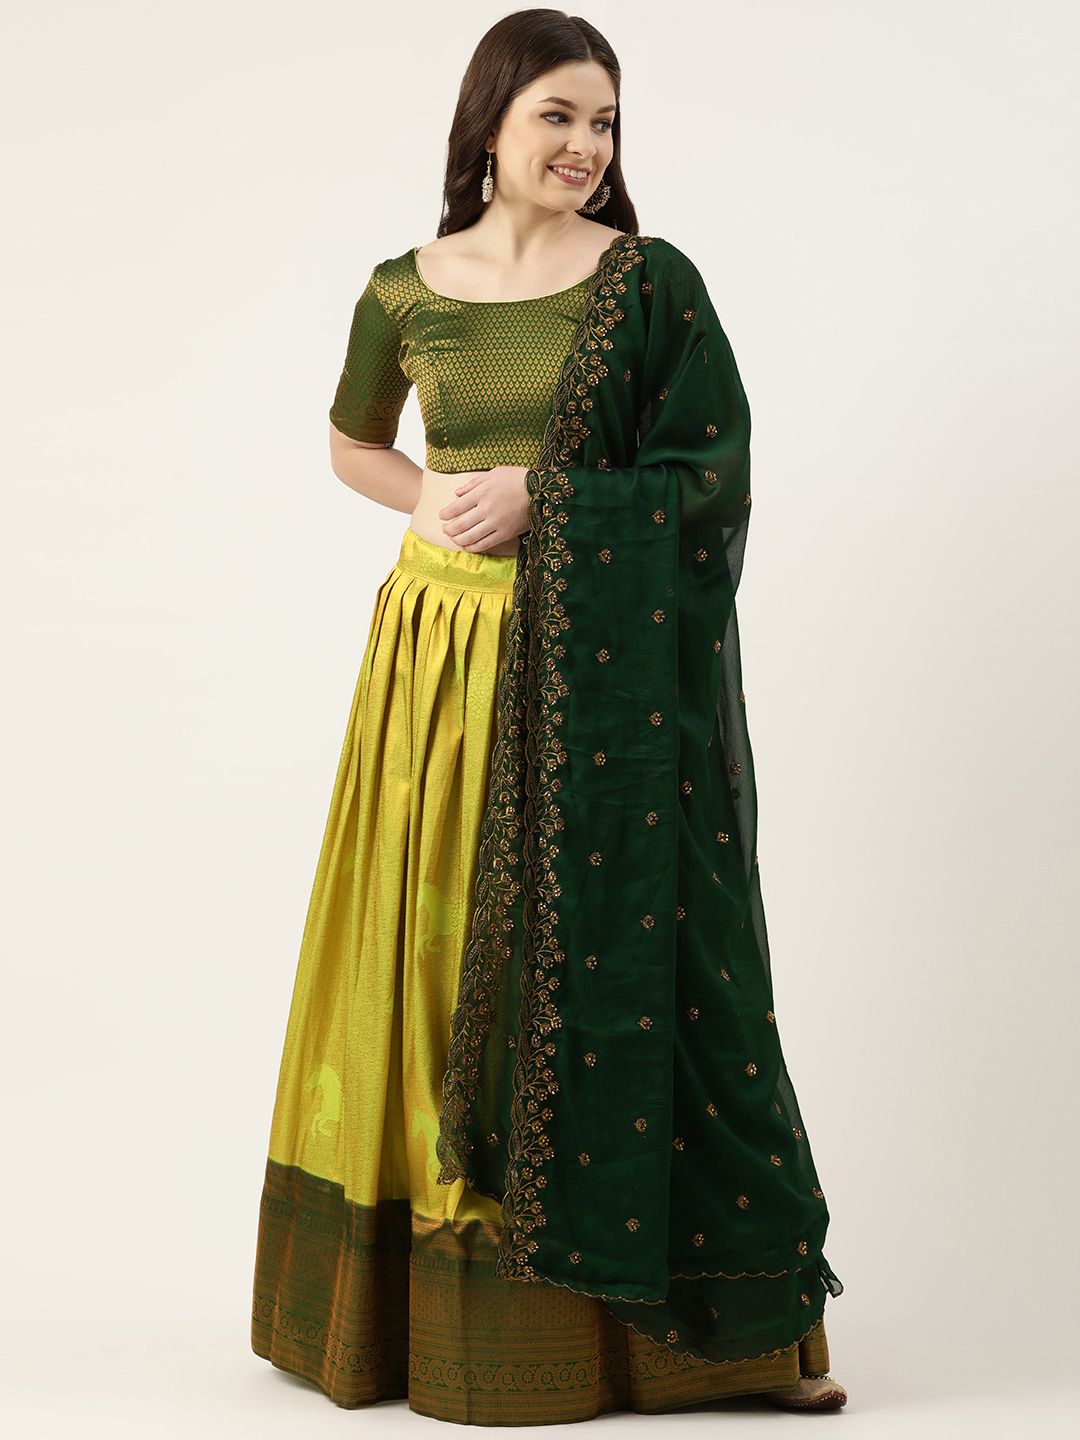 Pothys Green Unstitched Lehenga & Blouse With Dupatta Price in India